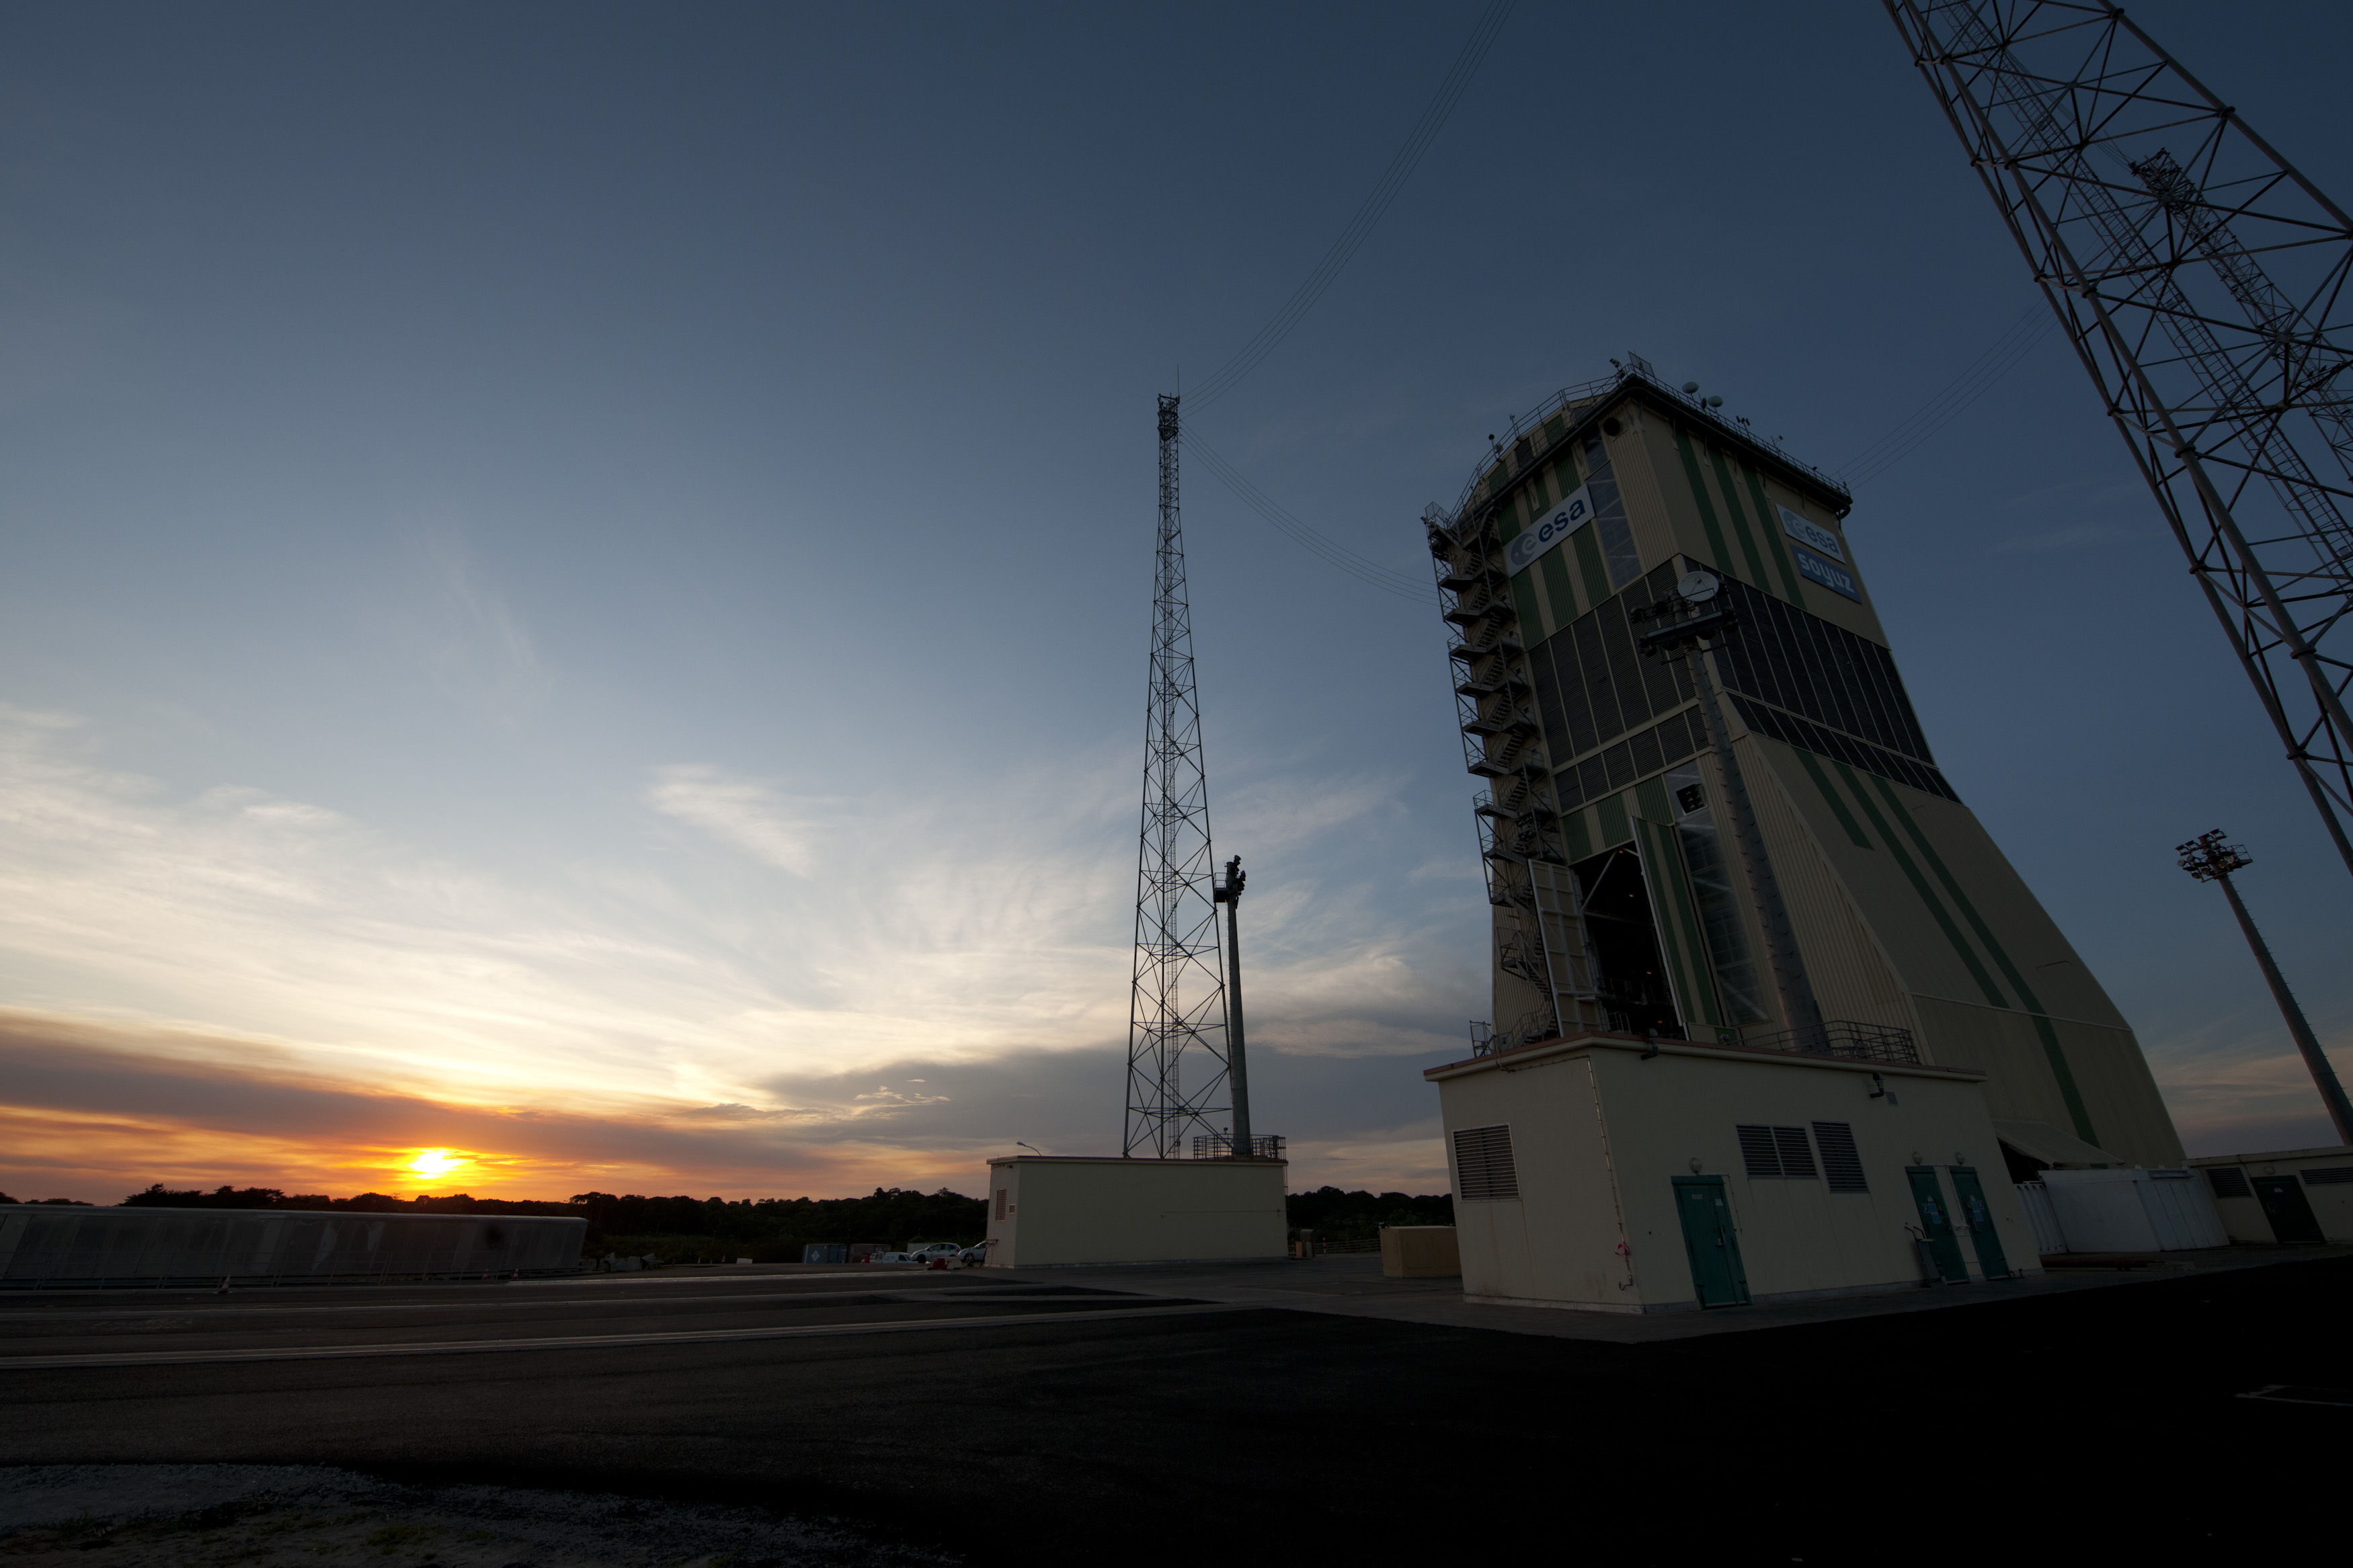 Europe’s Spaceport scheduled launches of 3 very different rockets in 2012 with first launch window starting on Feb. 9